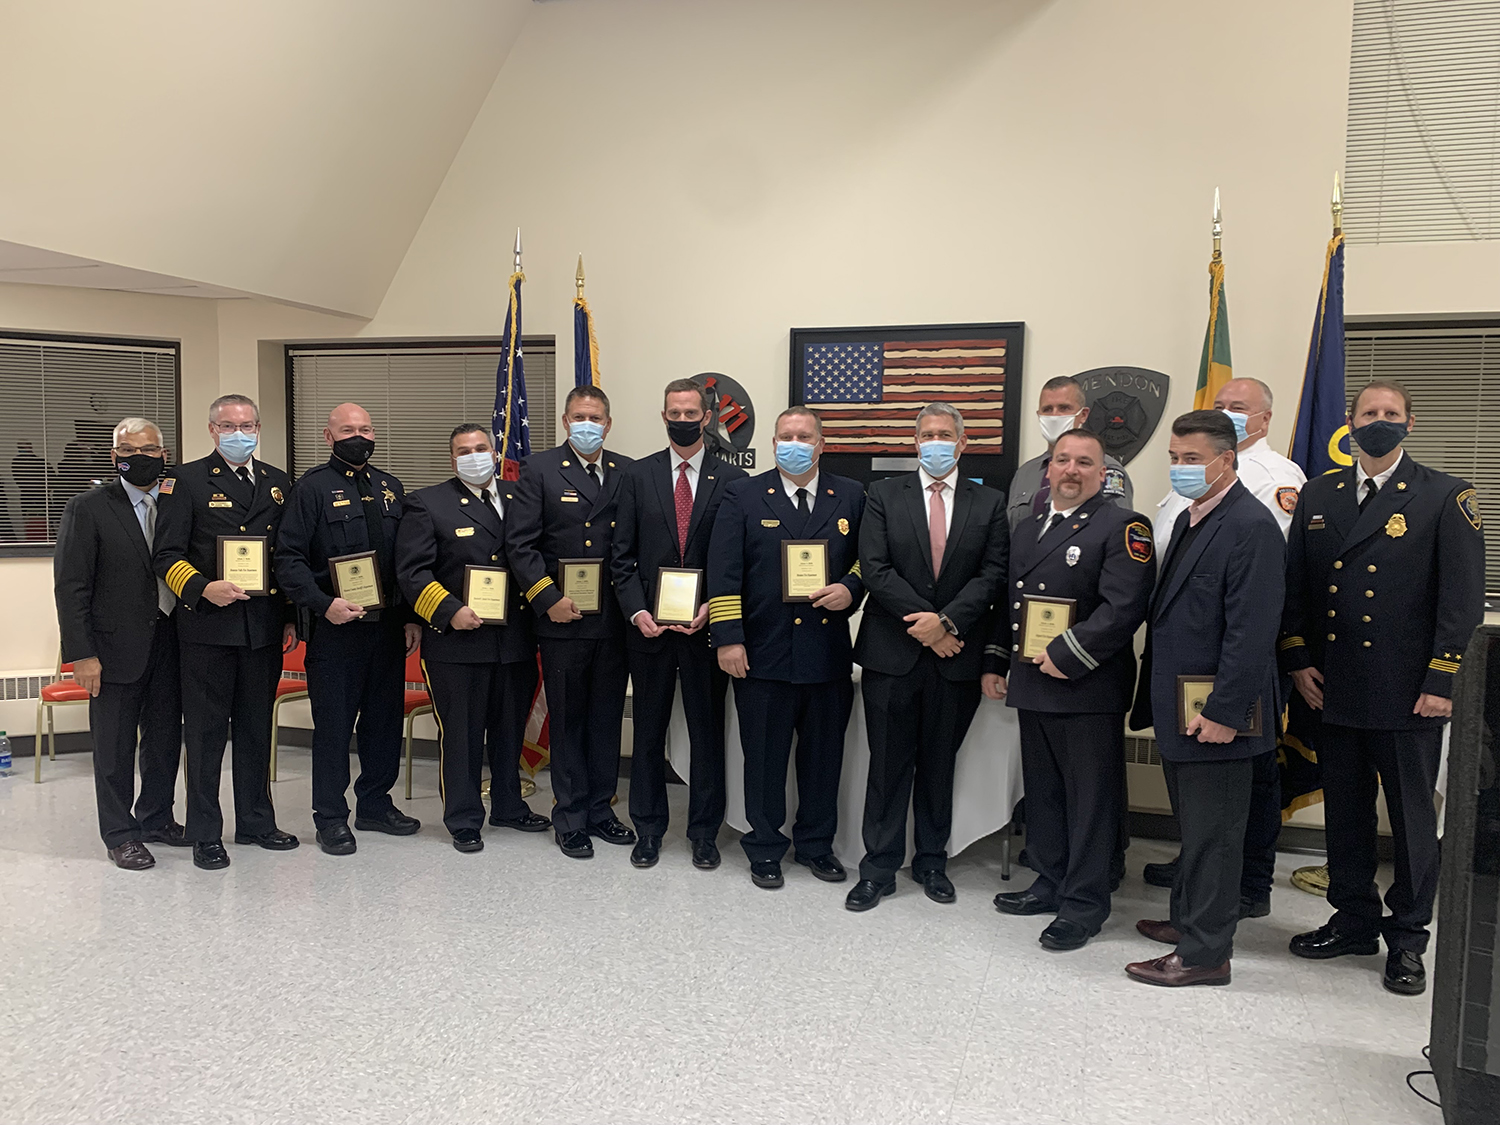 First Responders Recognized By Monroe County For Response To Military Helicopter Crash